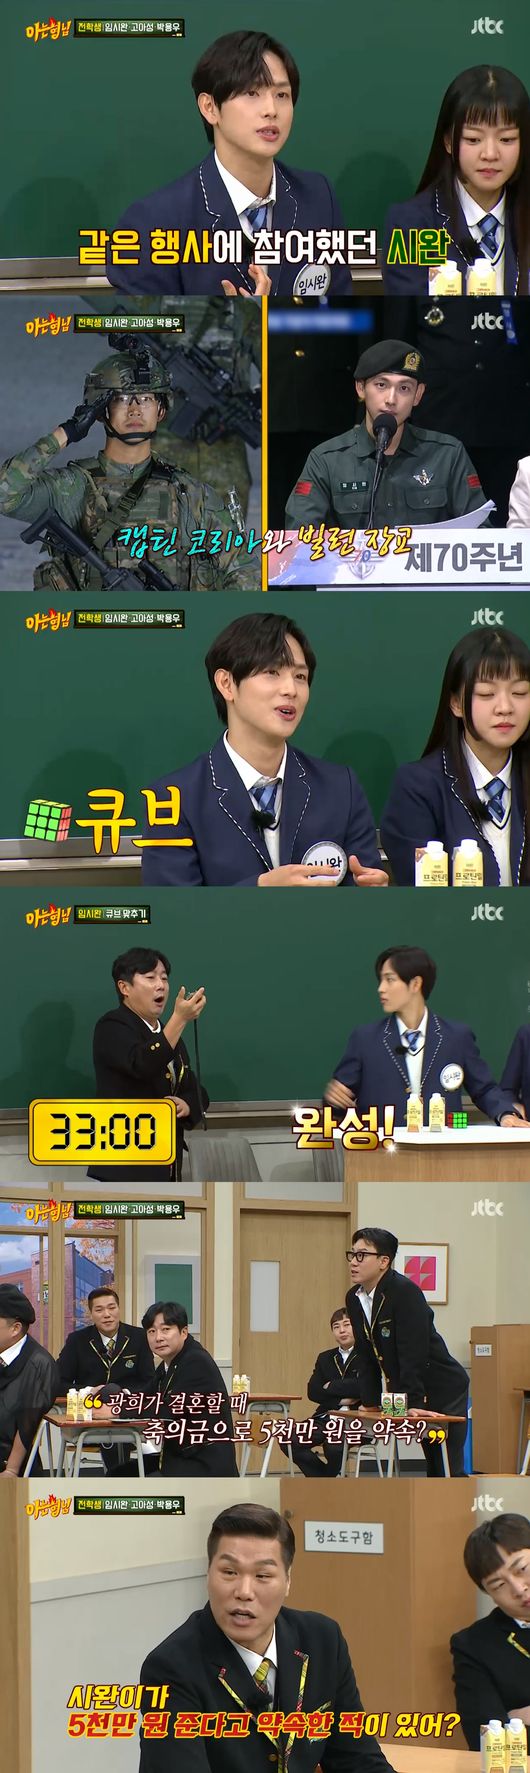 Siwan told the story of Gwang-hees 50 million won congratulatory money.In JTBC Men on a Mission broadcast on the 8th, Siwan, Go Ah-sung and Park Yong-woo of Drama Tracer appeared as transfer students, and Siwan told the story of Gwanghee.Siwan said, When Taekyeon came out, I did not talk about Captain Korea. At that time I saw MC. I am an officer, but I feel like Billon.I still remember Siwan doing really well with Cube, Kang Ho-dong said.Its not 30 seconds, but I dont do it these days, so my hand is slowing down and I think its going to take a minute, Siwan said, who attempted to match the Cube and succeeded in 33 seconds, catching the eye.Lee Sang-min asked, When Gwang-hee gets married, Siwan has a story that he receives 50 million won.Siwan said, It is a one-sided claim and I do not care much about Gwang-hee.Men on a Mission members asked Park Yong-woo, How much will Siwan pay if he gets married?Siwan hesitated and said, I am 5,000, and then he laughed around. I am a romance wedding without a congratulatory fee.Kim Hee-chul laughed, saying, I will receive everything. I will receive it all over again.Lee Jin-ho brought up the Kwang-hee story.Lee Jin-ho said, I went to a shop like Gwanghee, and Gwanghee asked me about the schedule of the entertainers in the shop. He said, There is a meeting that loves Park Jae-seok.The representative is Haha type. Haha type said that Park Jae-seok is favoring Yongjin these days, but he knew Yongjin as me and checked me. On this day, Go Ah-sung caught the eye by saying that his nickname was Ulabullah Blue Chan: a childrens program that Go Ah-sung made in the past.Men on a Mission members who saw the photo at the time said, It is the most cute picture in the past.Go Ah-sung talked about the film Monster shooting scene in the past.Go Ah-sung said, I did not know it was a sad scene when I was a child. I lost my family and I was so tired of finding me, so I ate rice.I didnt know it then, but when I grew up, I was so sad. Go Ah-sung said, When I was a child, I received a portrait of the portrait from Monster. Now that I was older, it was meaningful to see the portrait.Since then, I have taken meaningful props every time I shoot, he said. When I act as a worker, I always take a employee ID. 